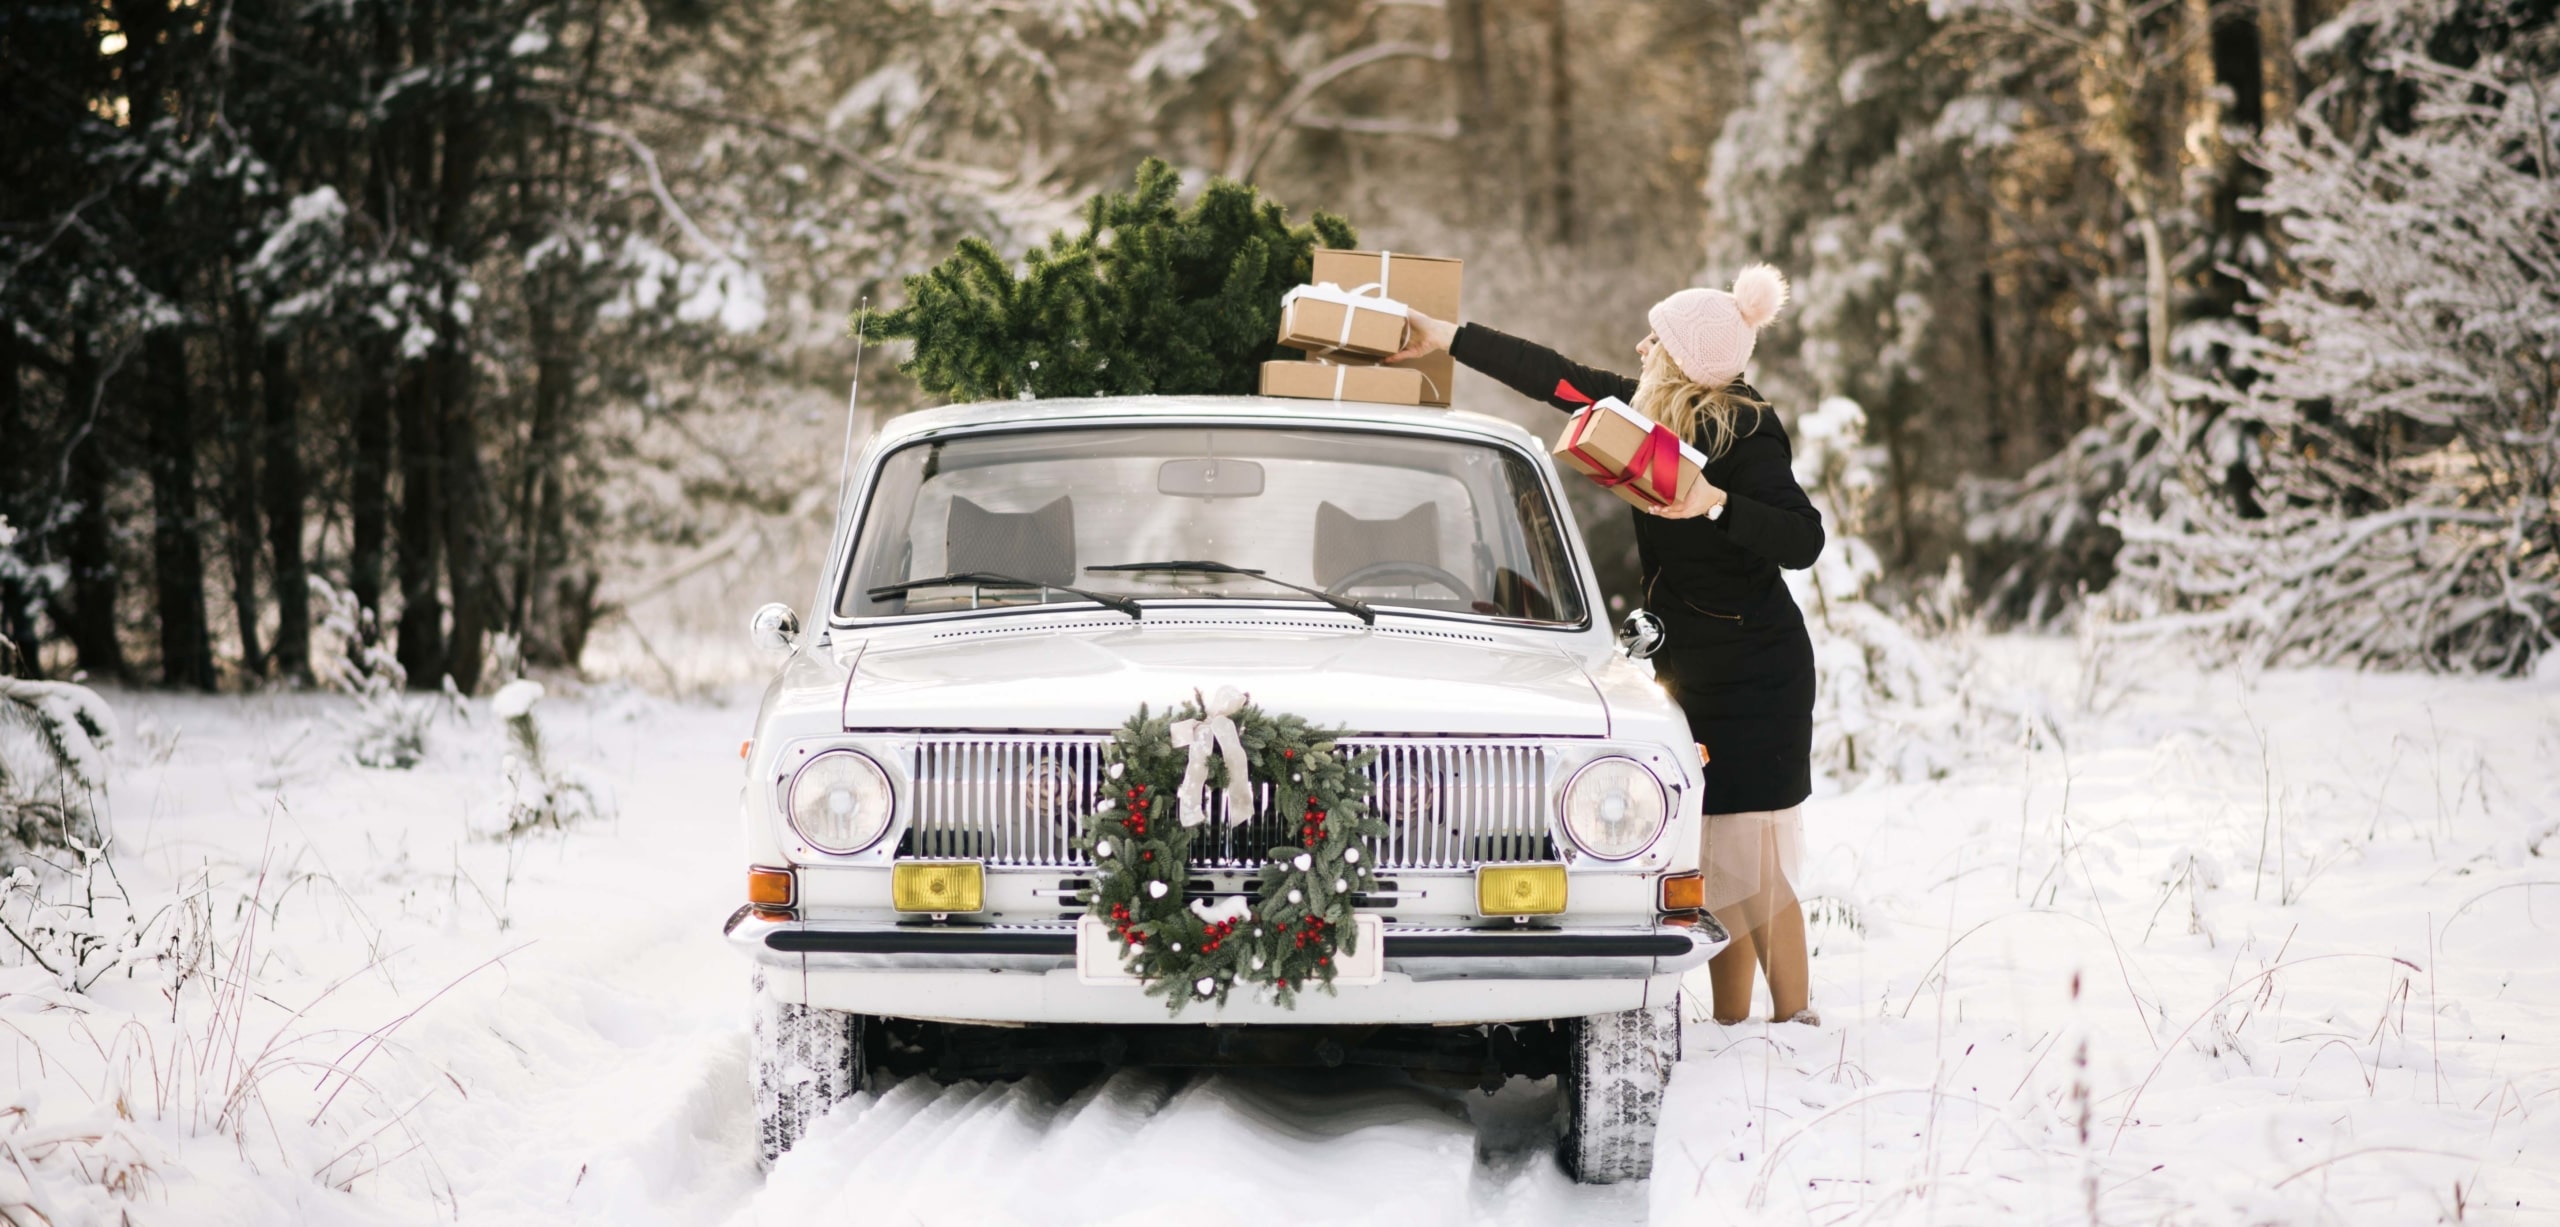 A vintage car with a decorative wreath on the front is parked in the snow as a woman in a winter hat piles Christmas presents on to the roof | Holiday Car Buying Could Mean Tree-mendous Savings